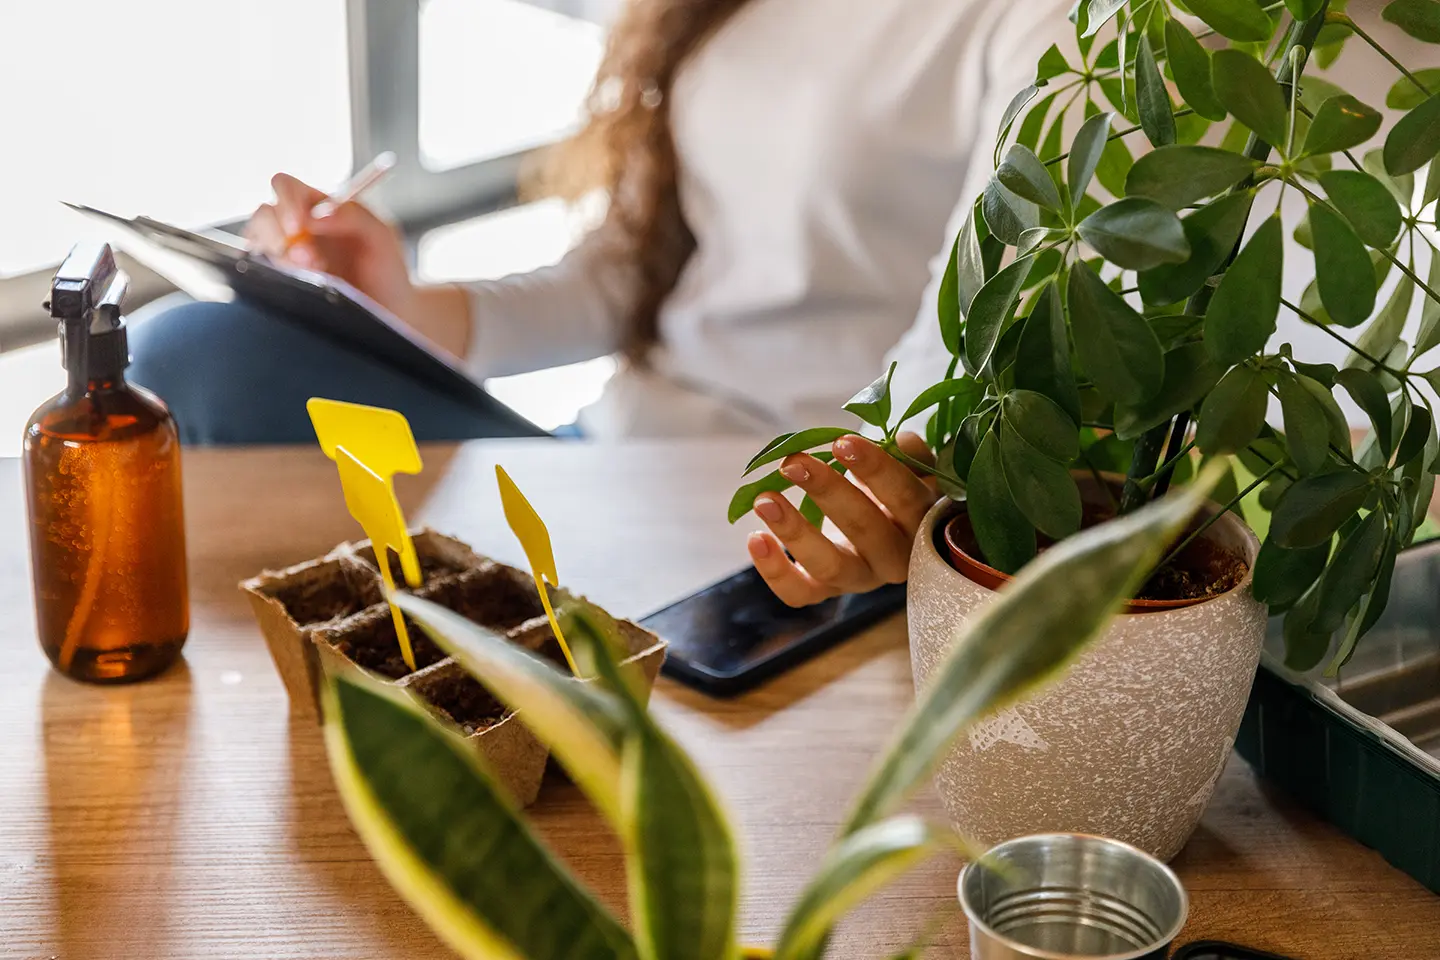 Increase employee retention rates with plants at the office.